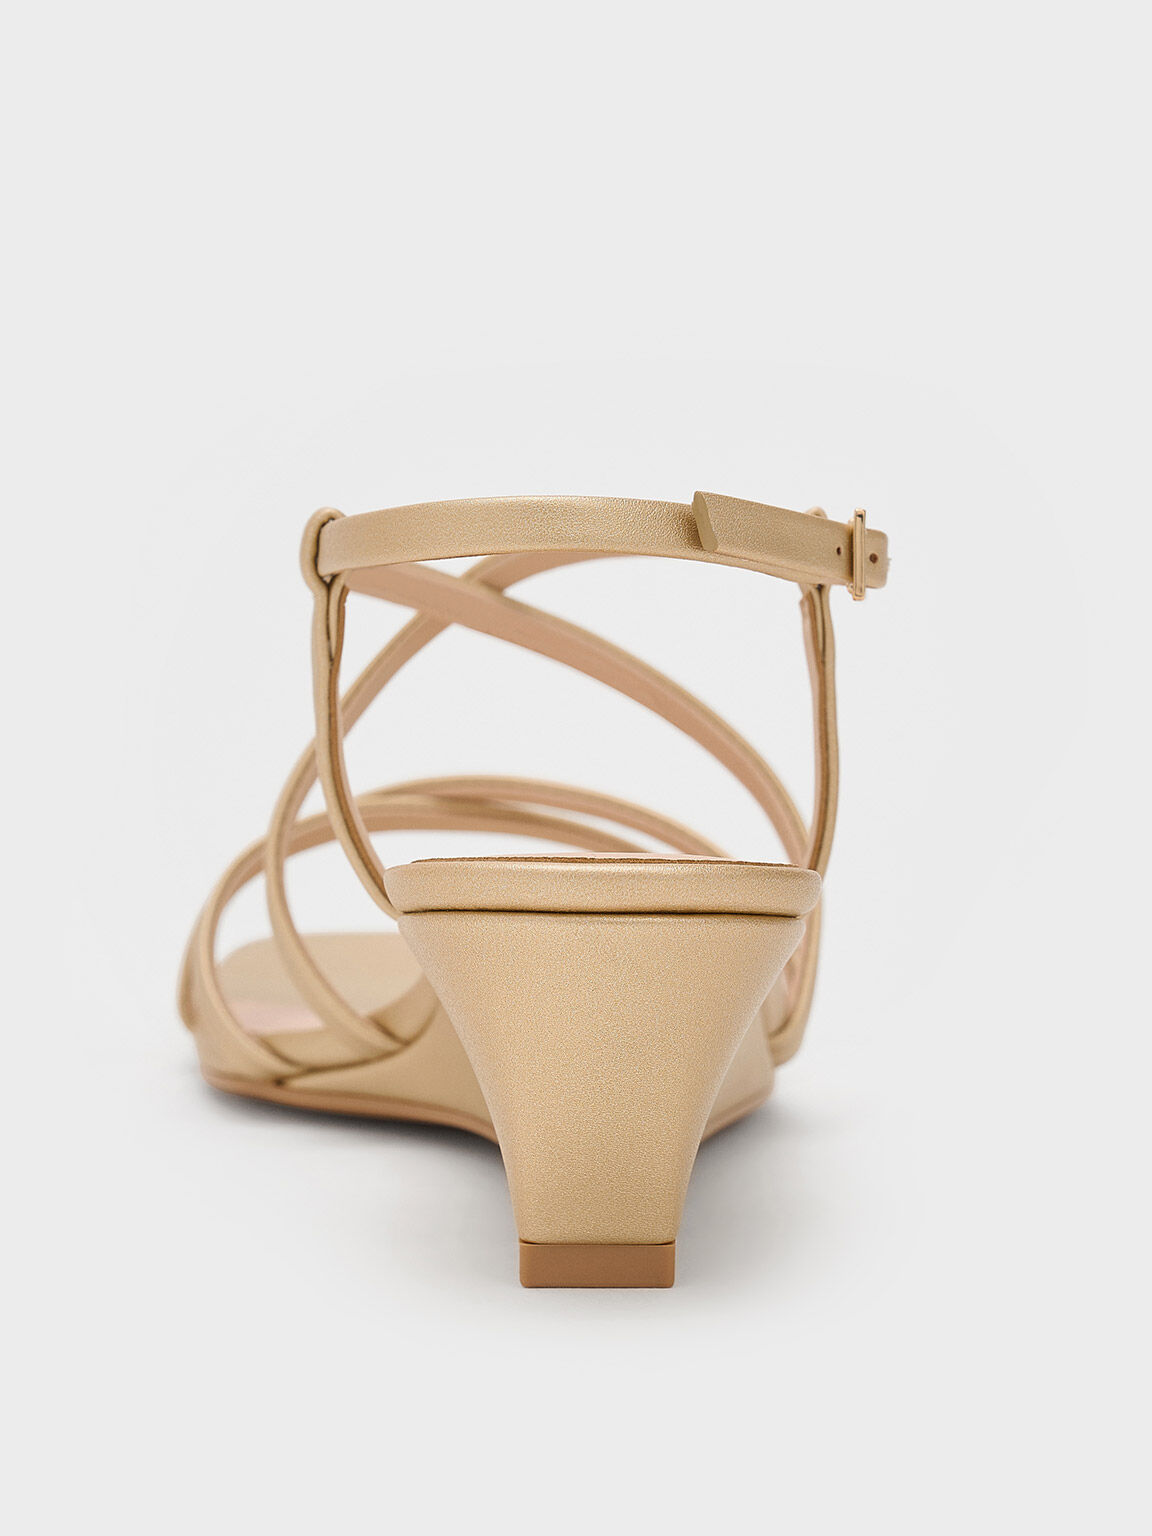 Strappy Wedge Sandals, Gold, hi-res